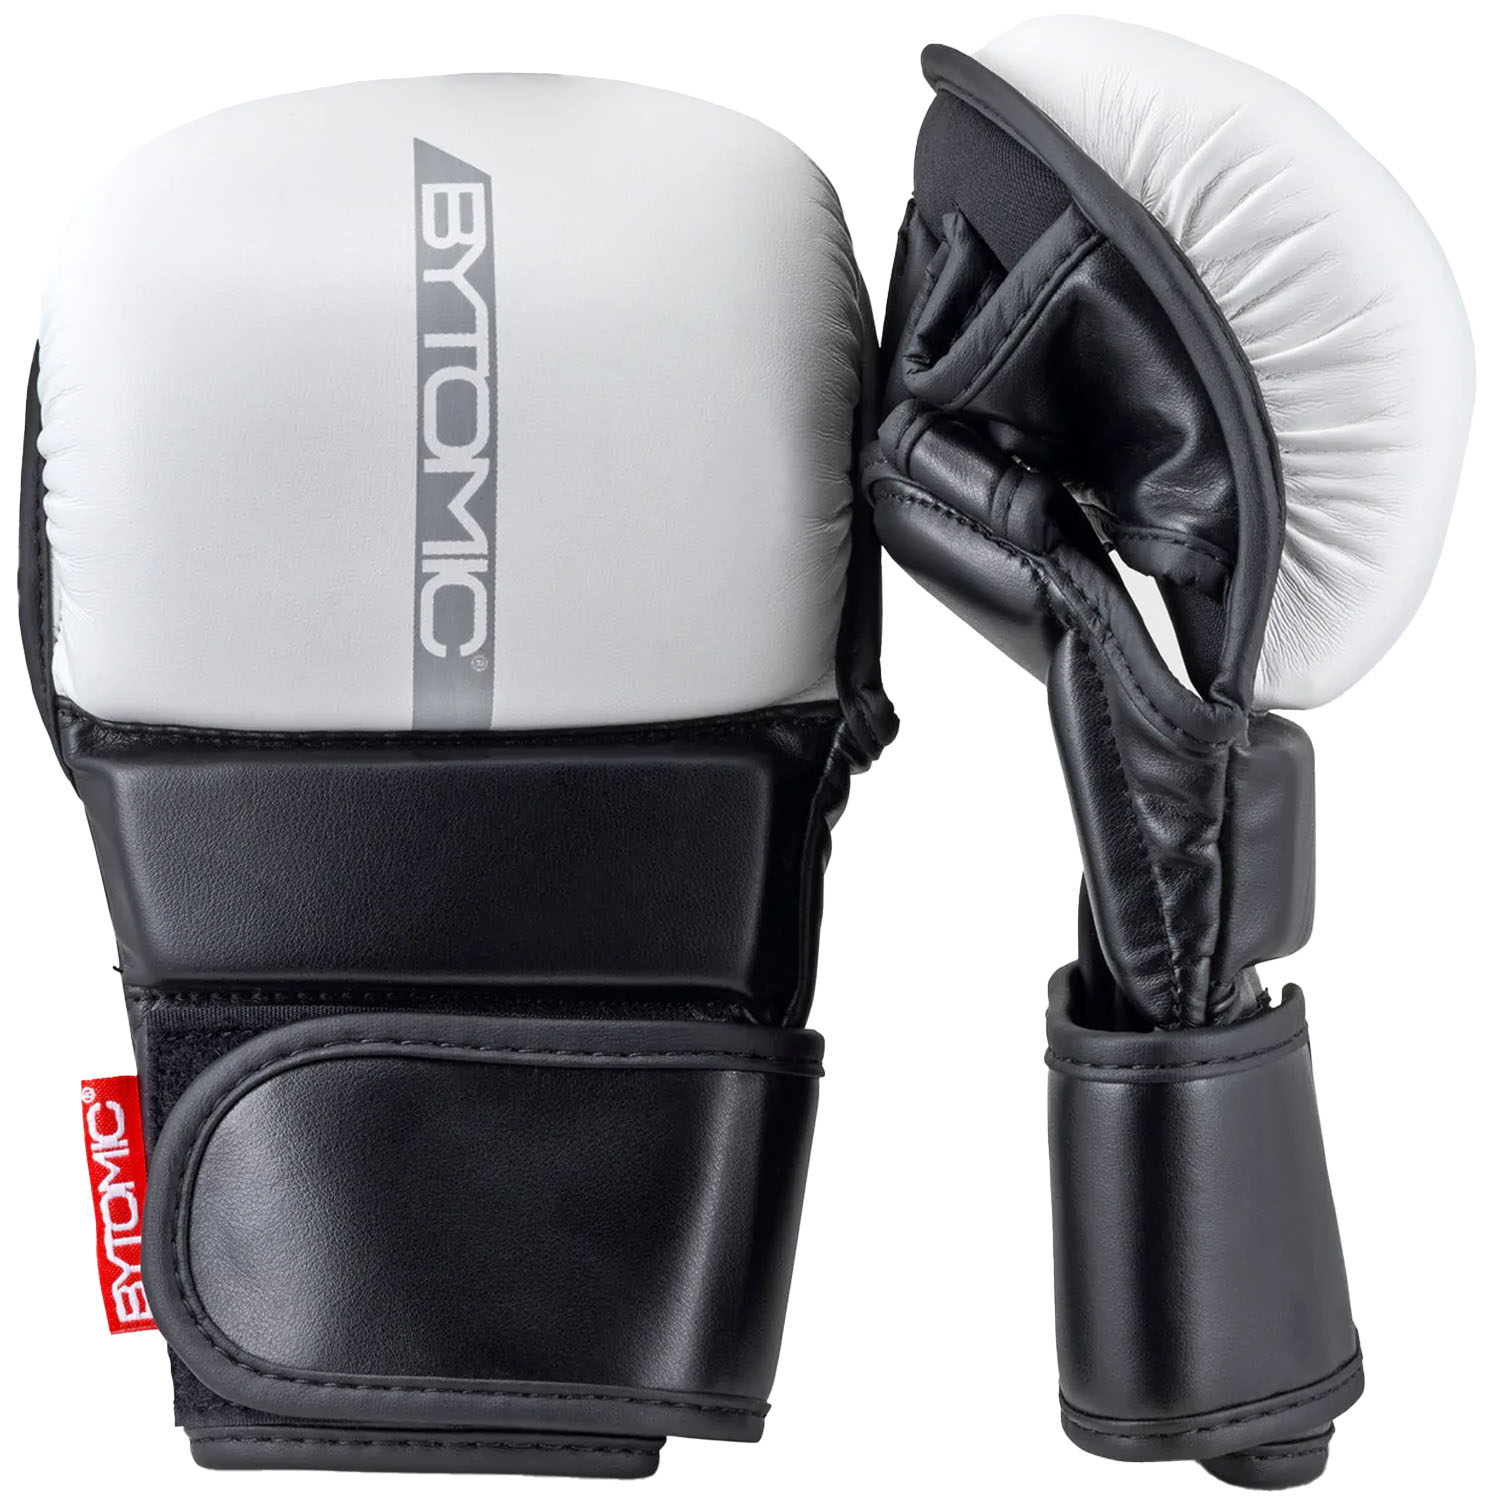 Bytomic MMA Sparring Boxhandschuhe, Red Label, weiß